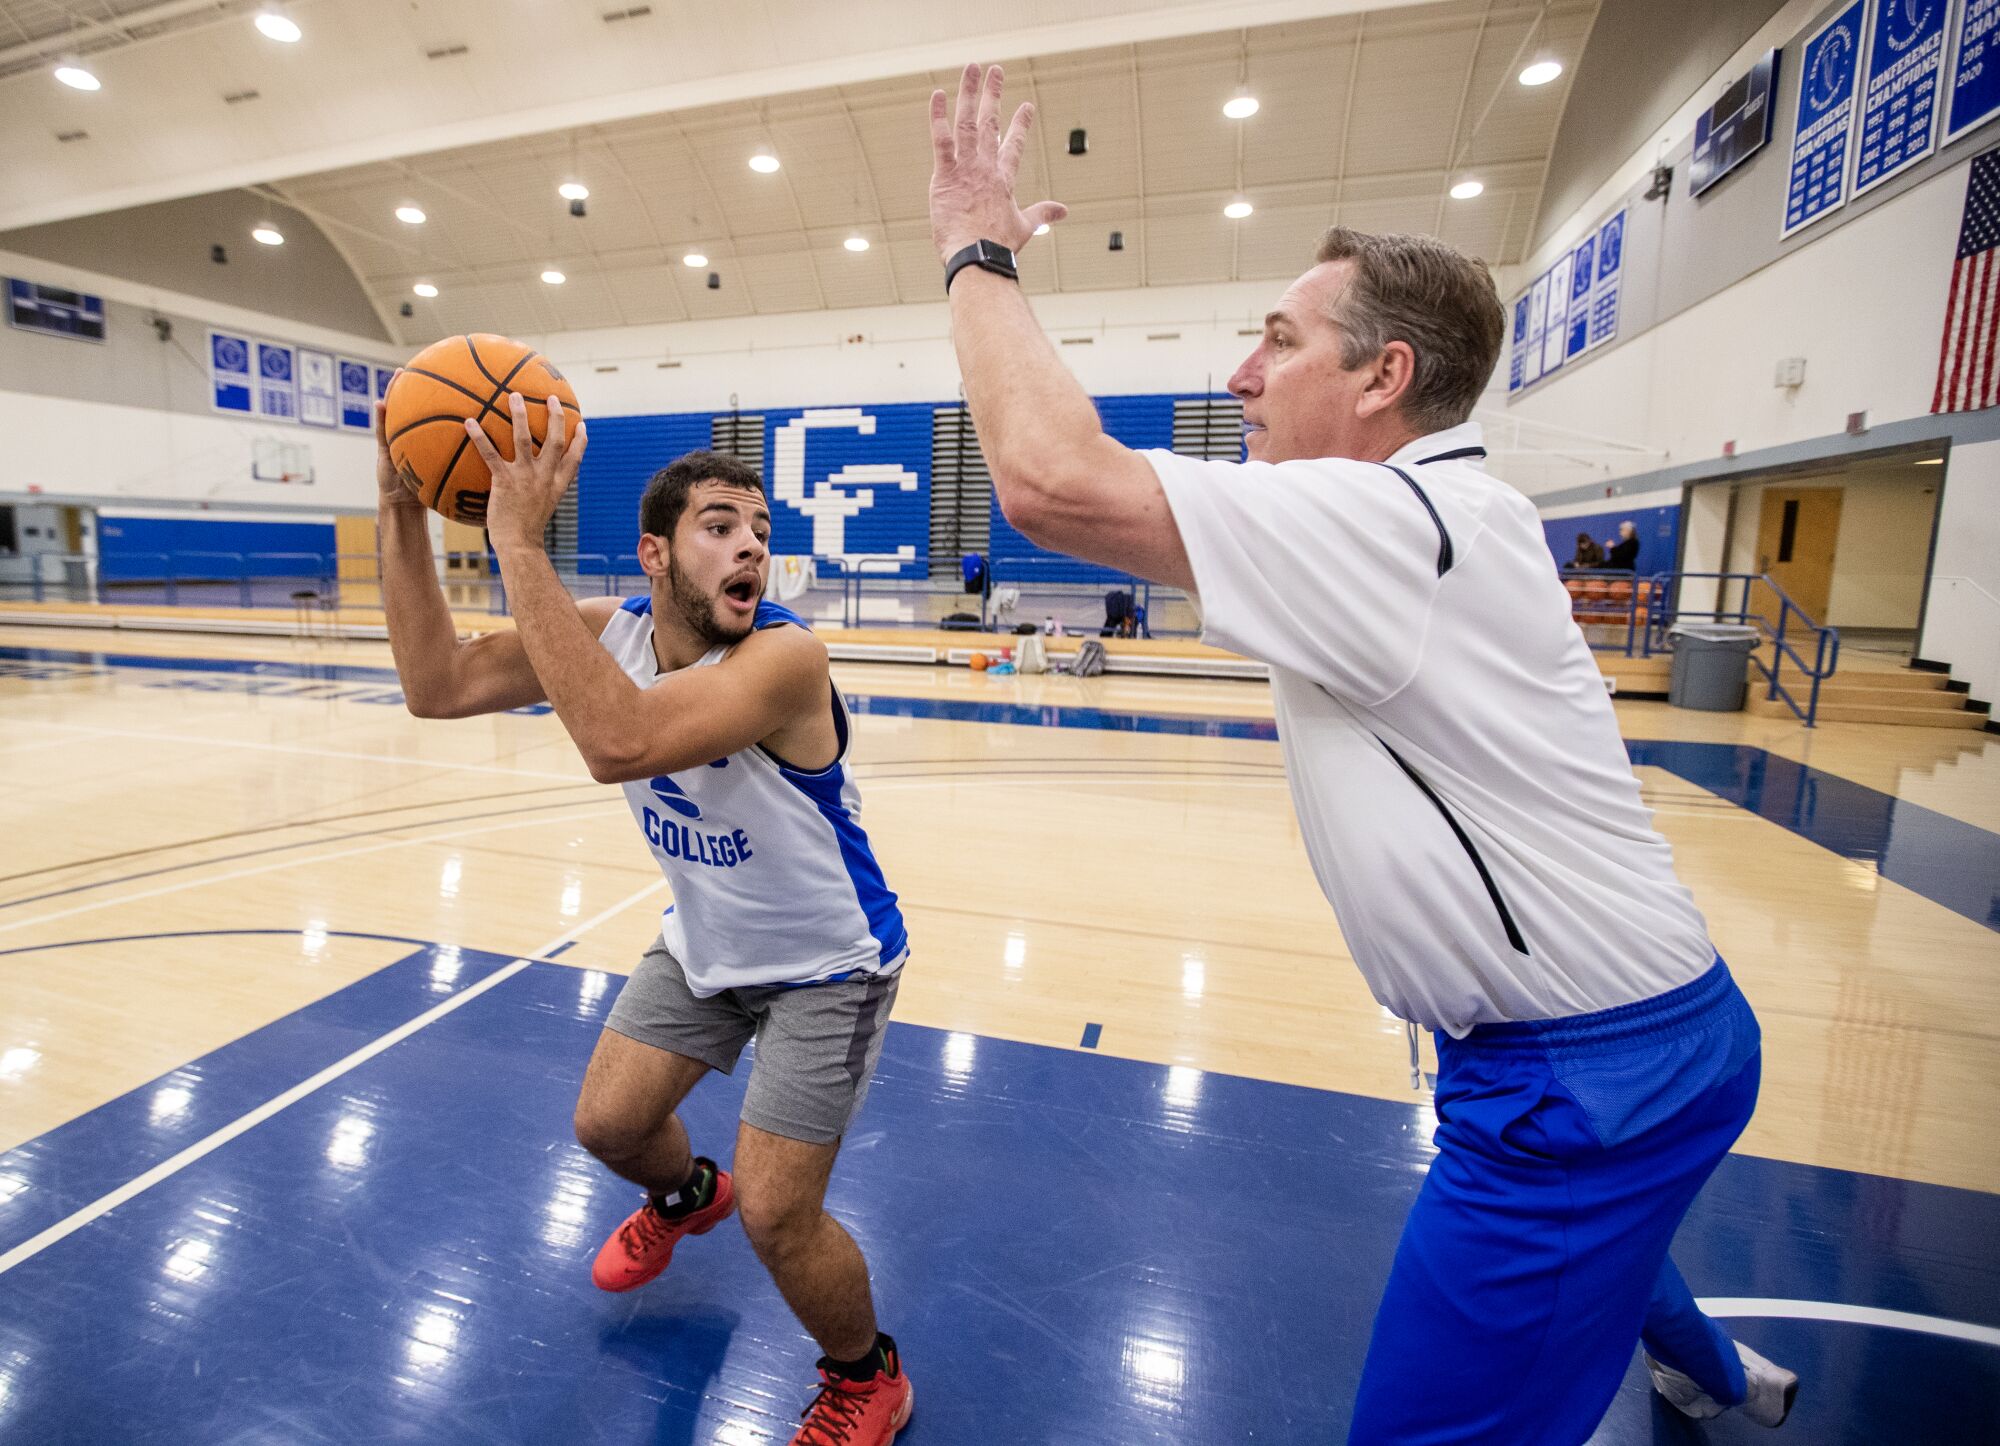 Kade West goes up for a shot during a practice session with Coach Russ May,